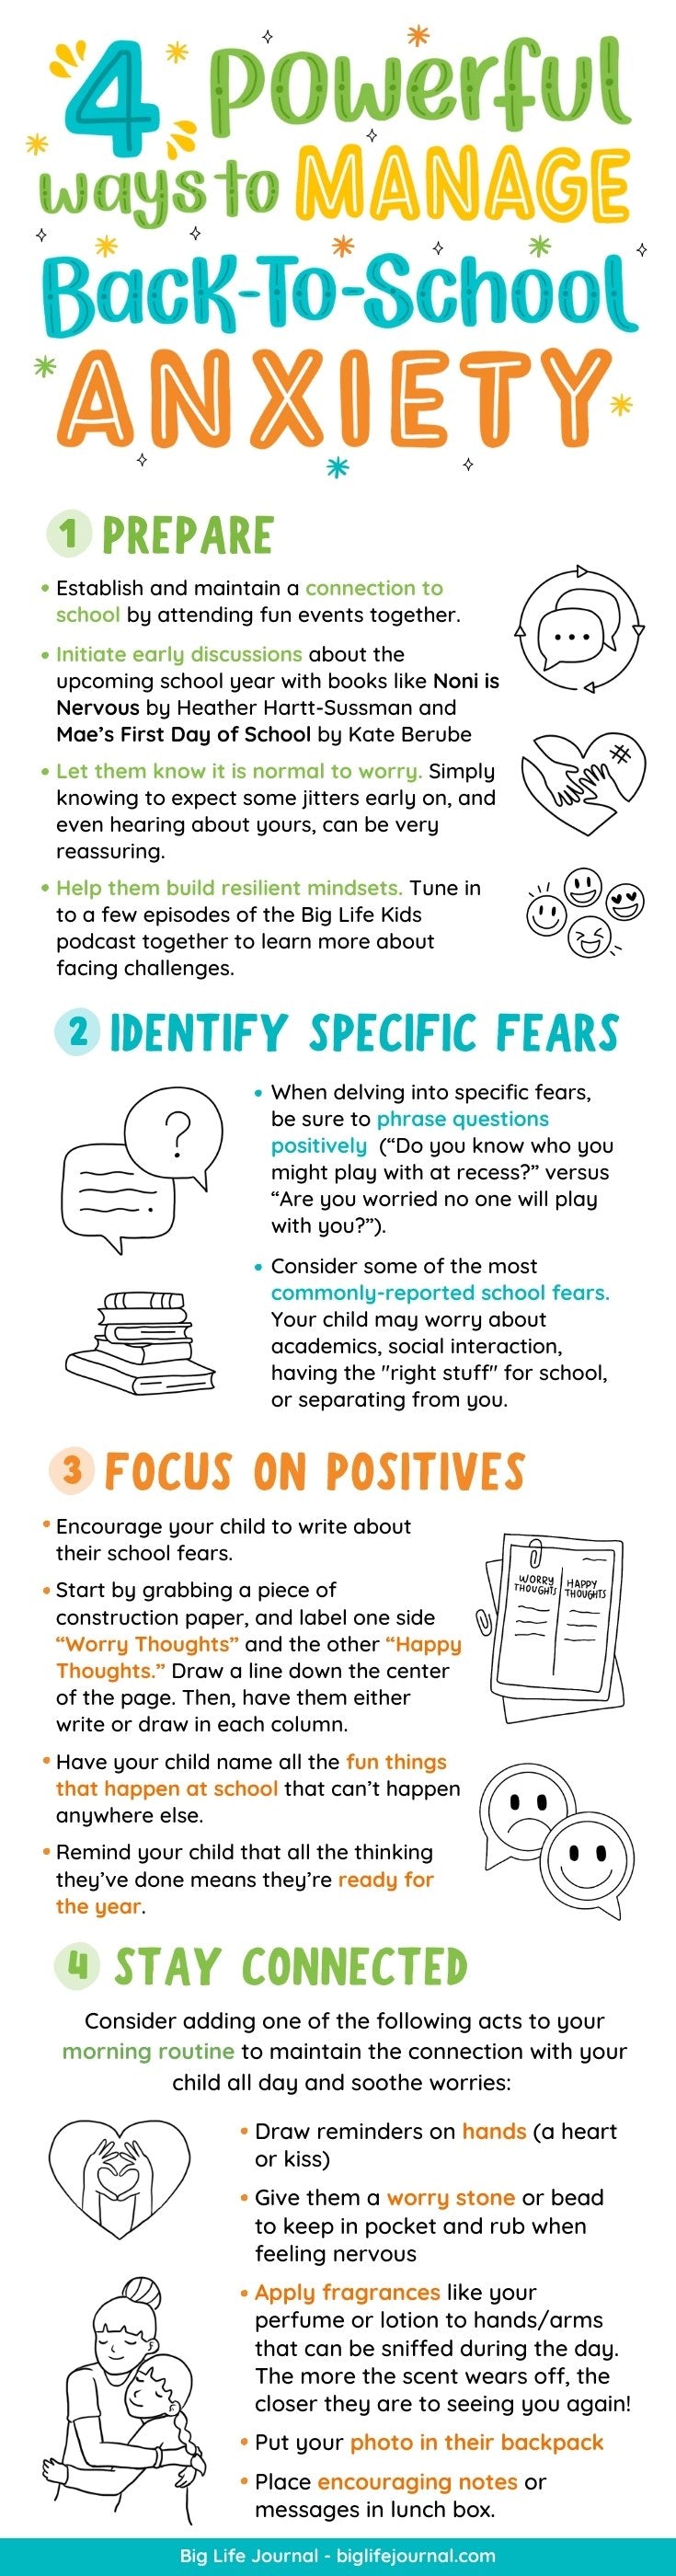 How to Beat Back-to-School Anxiety - Door County Partnership for